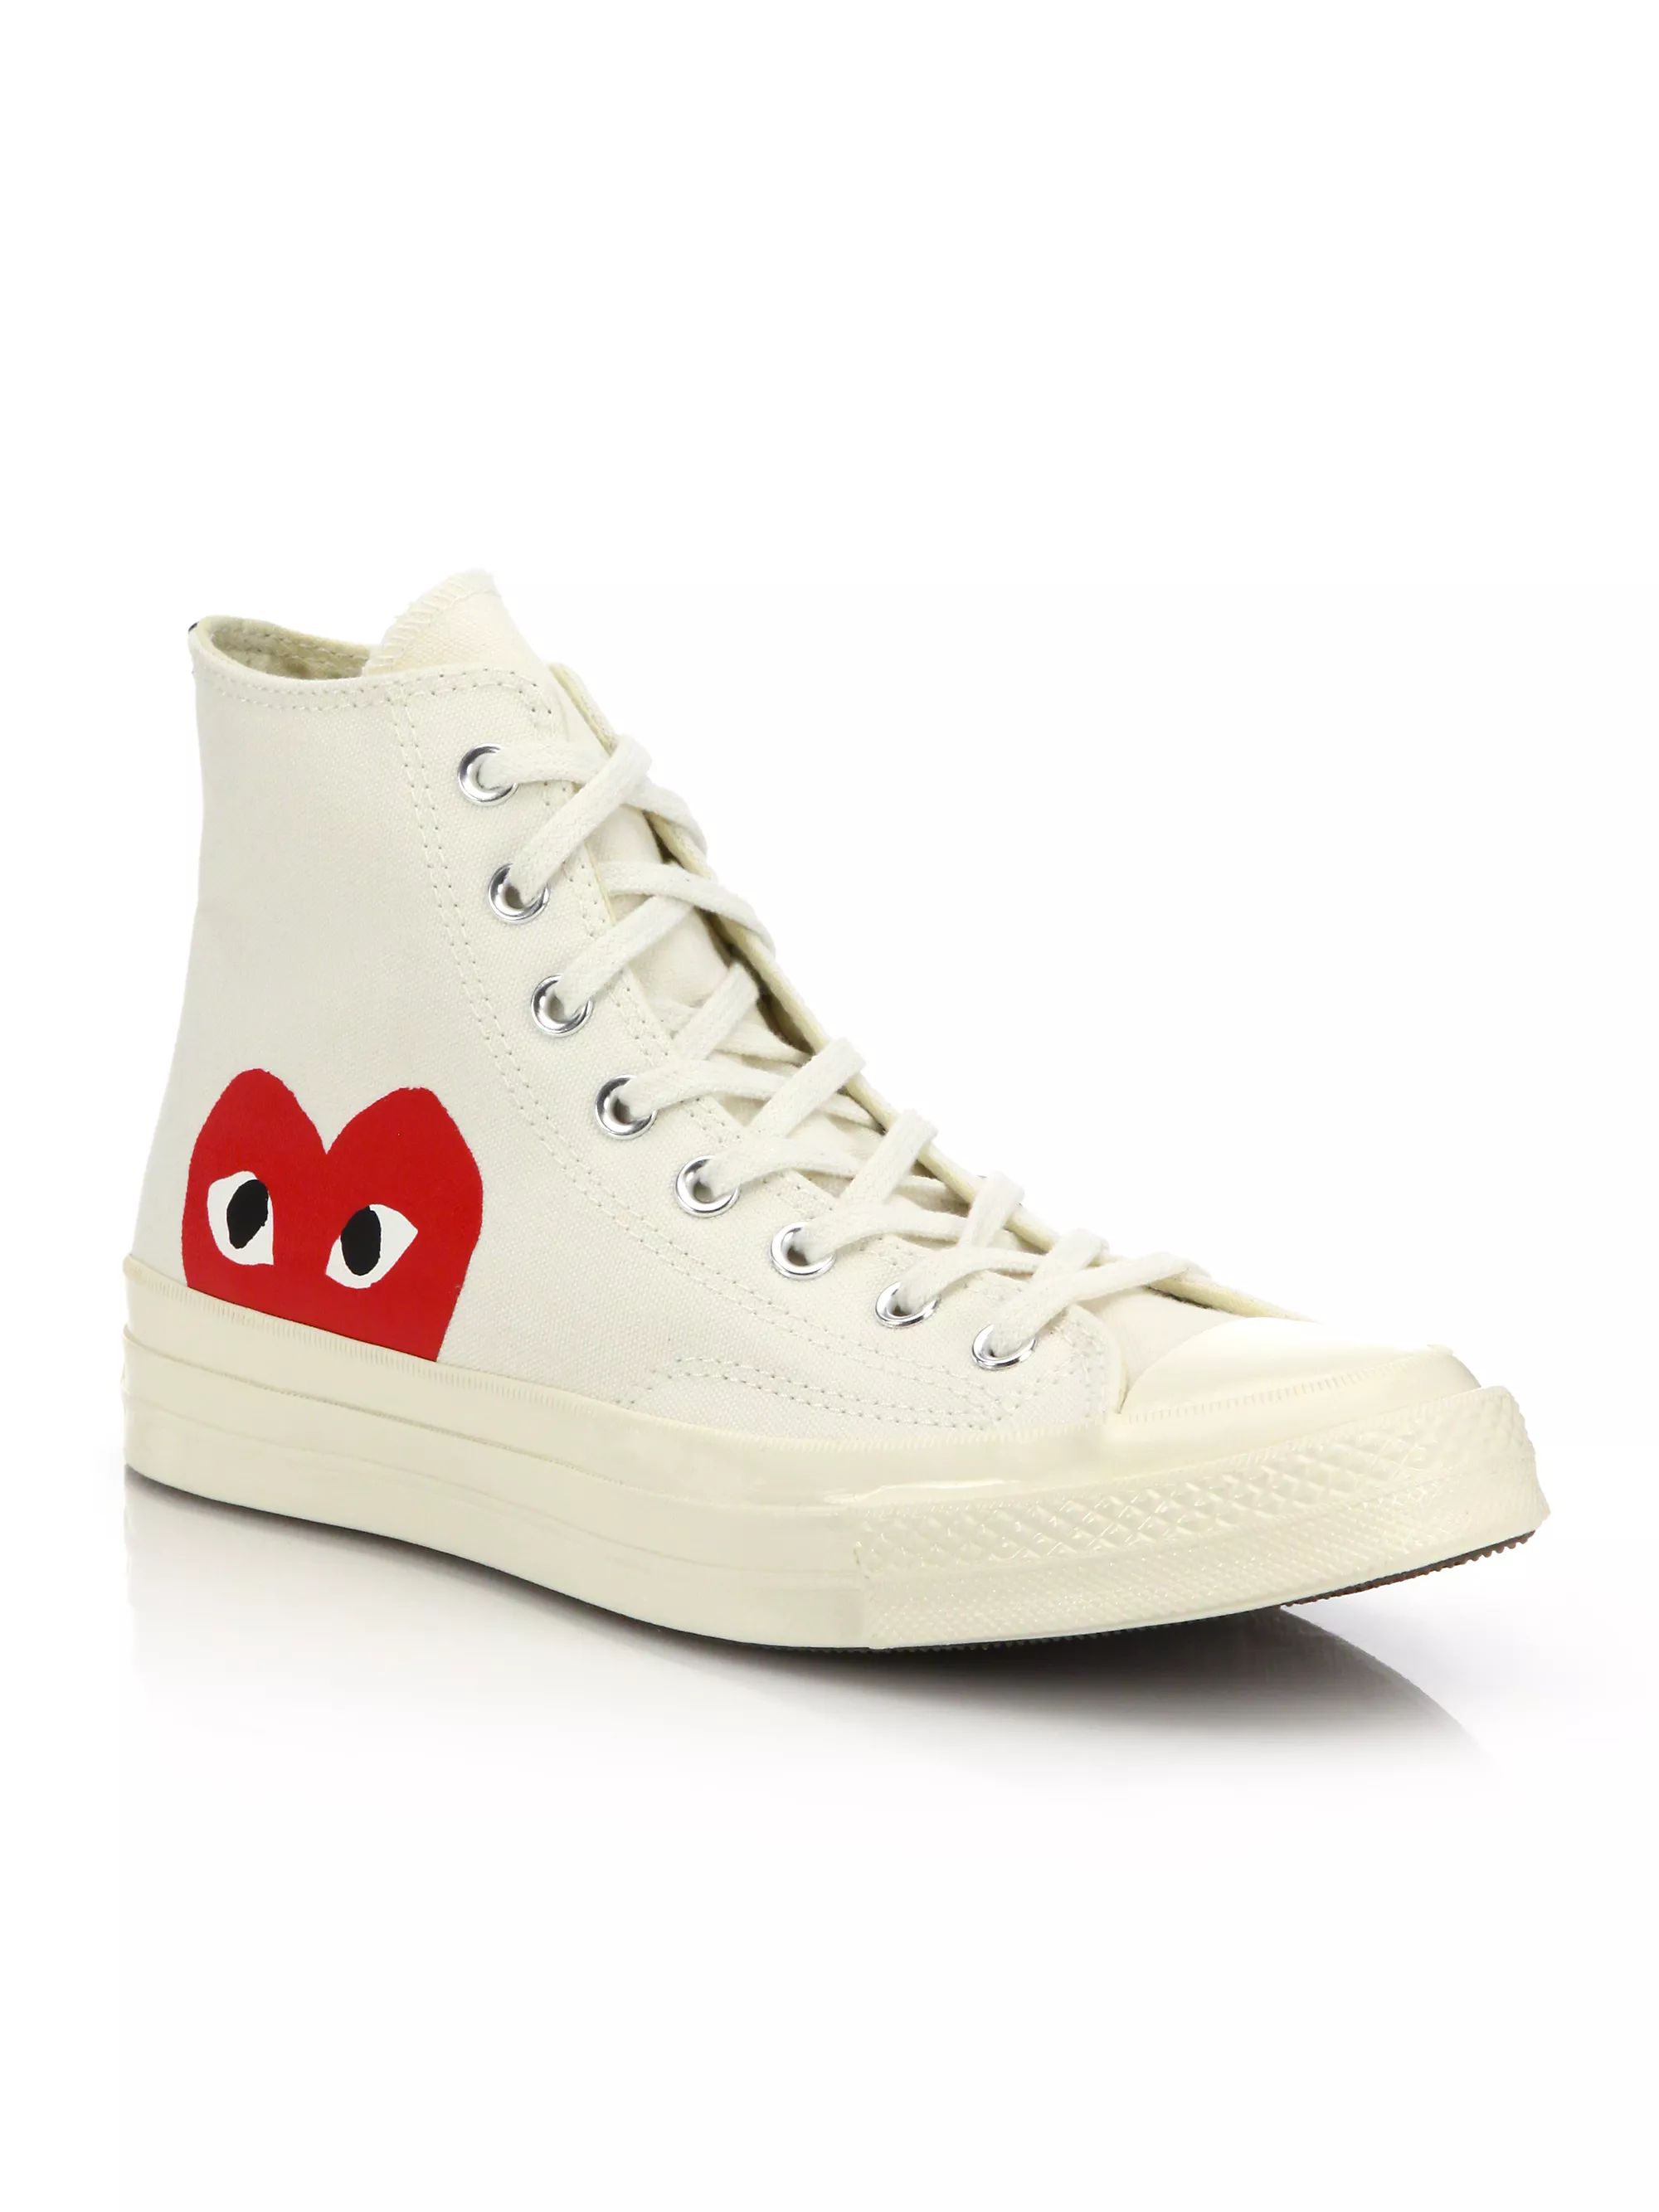 CdG PLAY x Converse Unisex Chuck Taylor All Star Peek-A-Boo High-Top Sneakers | Saks Fifth Avenue